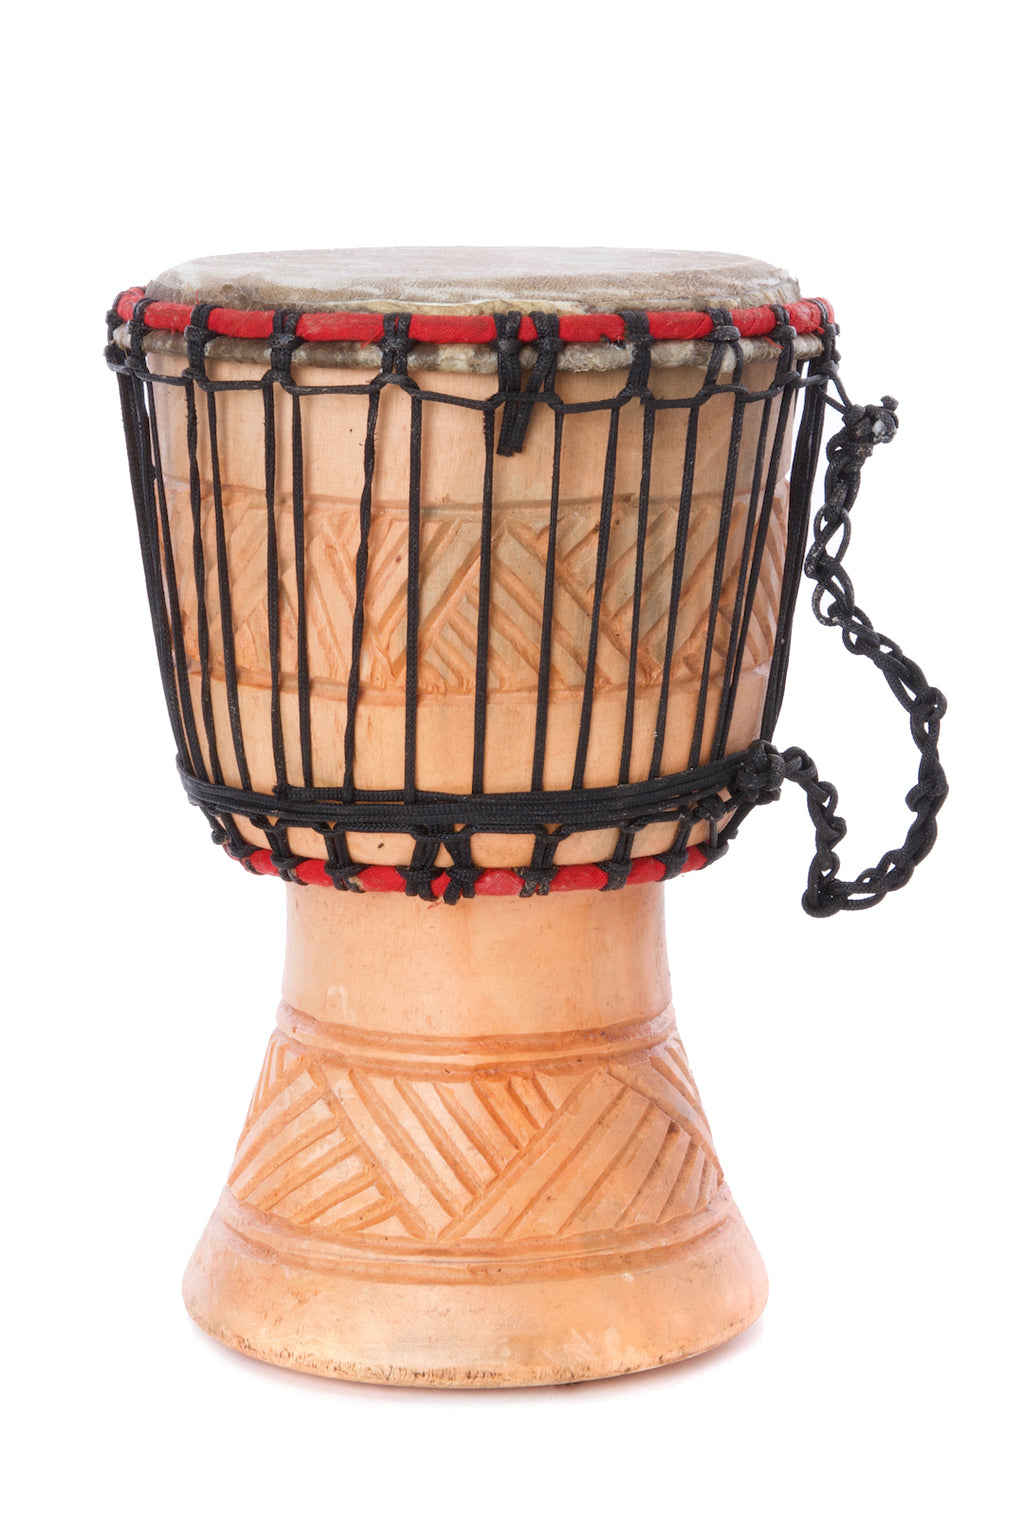 Small Maasai Warrior Design Double Spin Drum – Swahili Wholesale